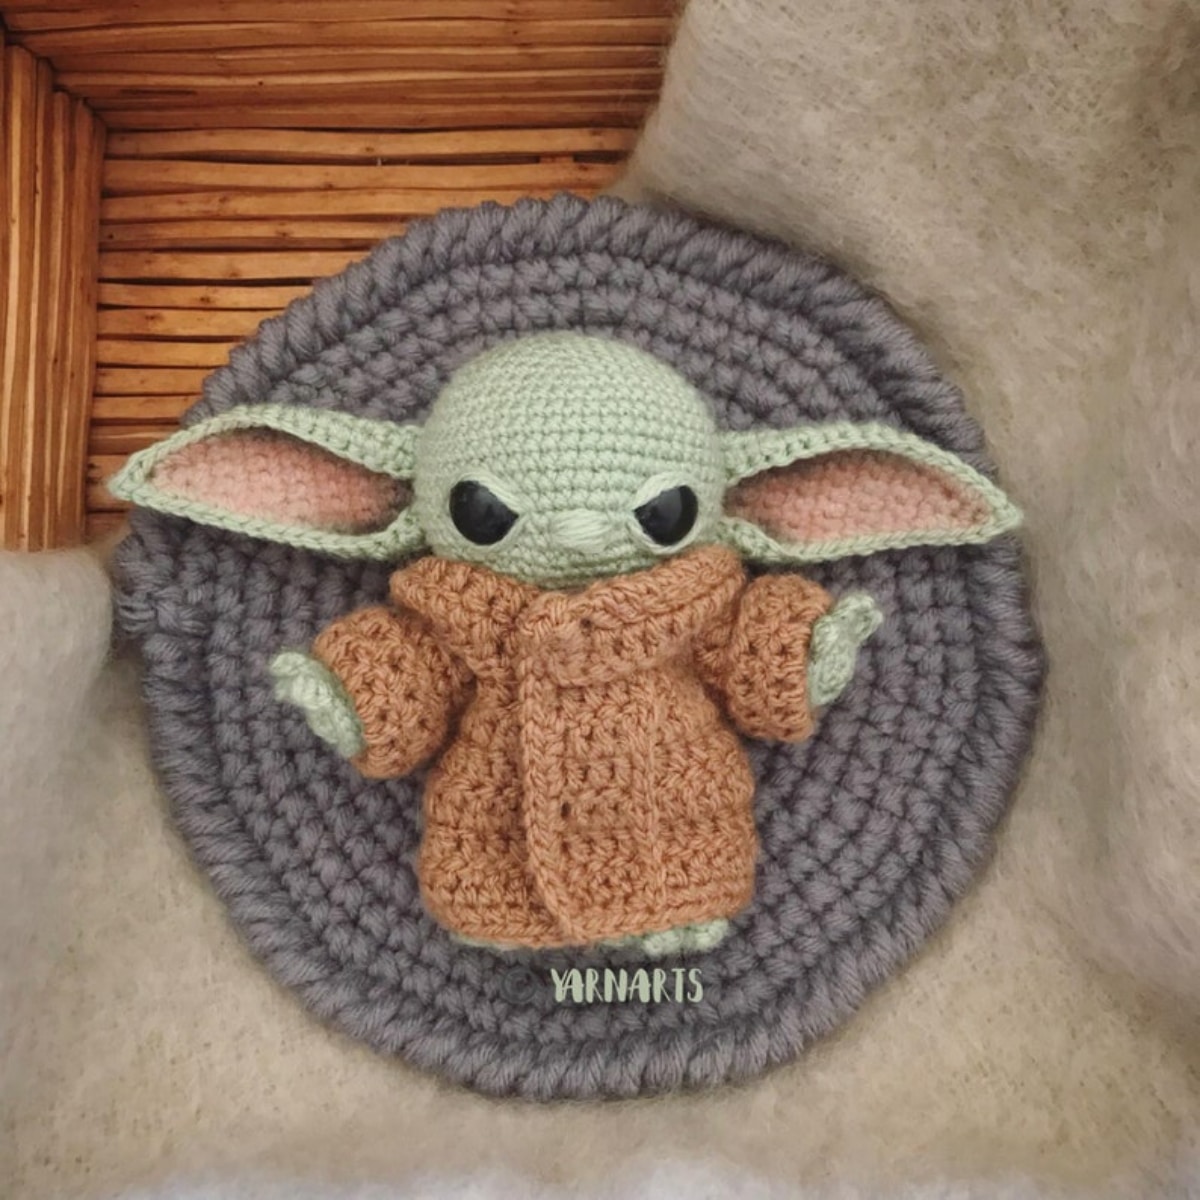 Small green crochet baby Yoda with pink ears wearing a brown robe and lying in a gray crochet pod.